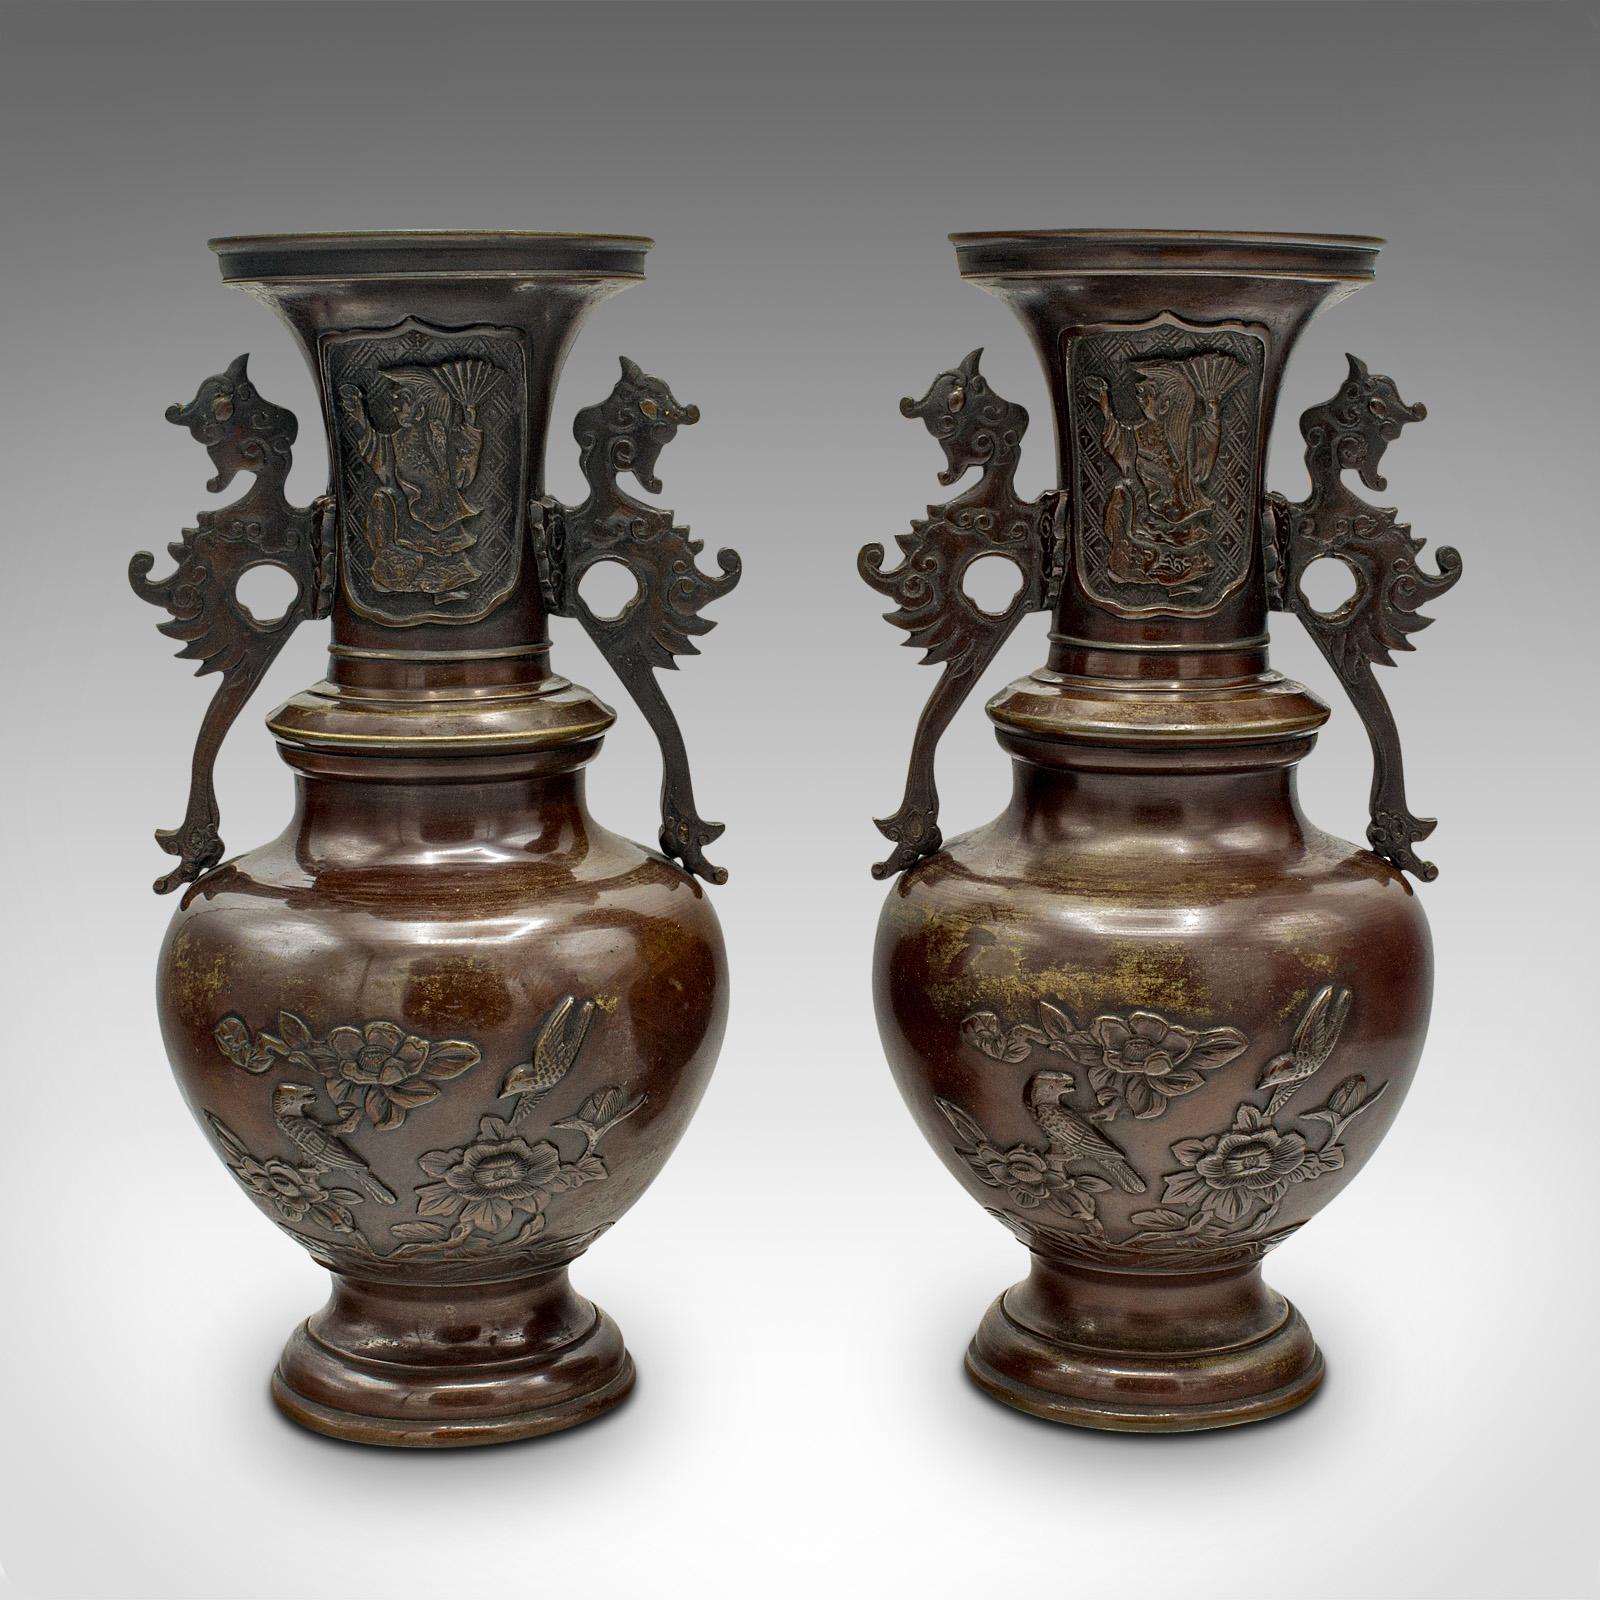 This is a pair of antique decorative urns. A Japanese, bronze baluster vase, dating to the Victorian period, circa 1850.

Delightful pair of vases from the latter years of the Edo period
Displaying a desirable aged patina throughout
Weathered bronze